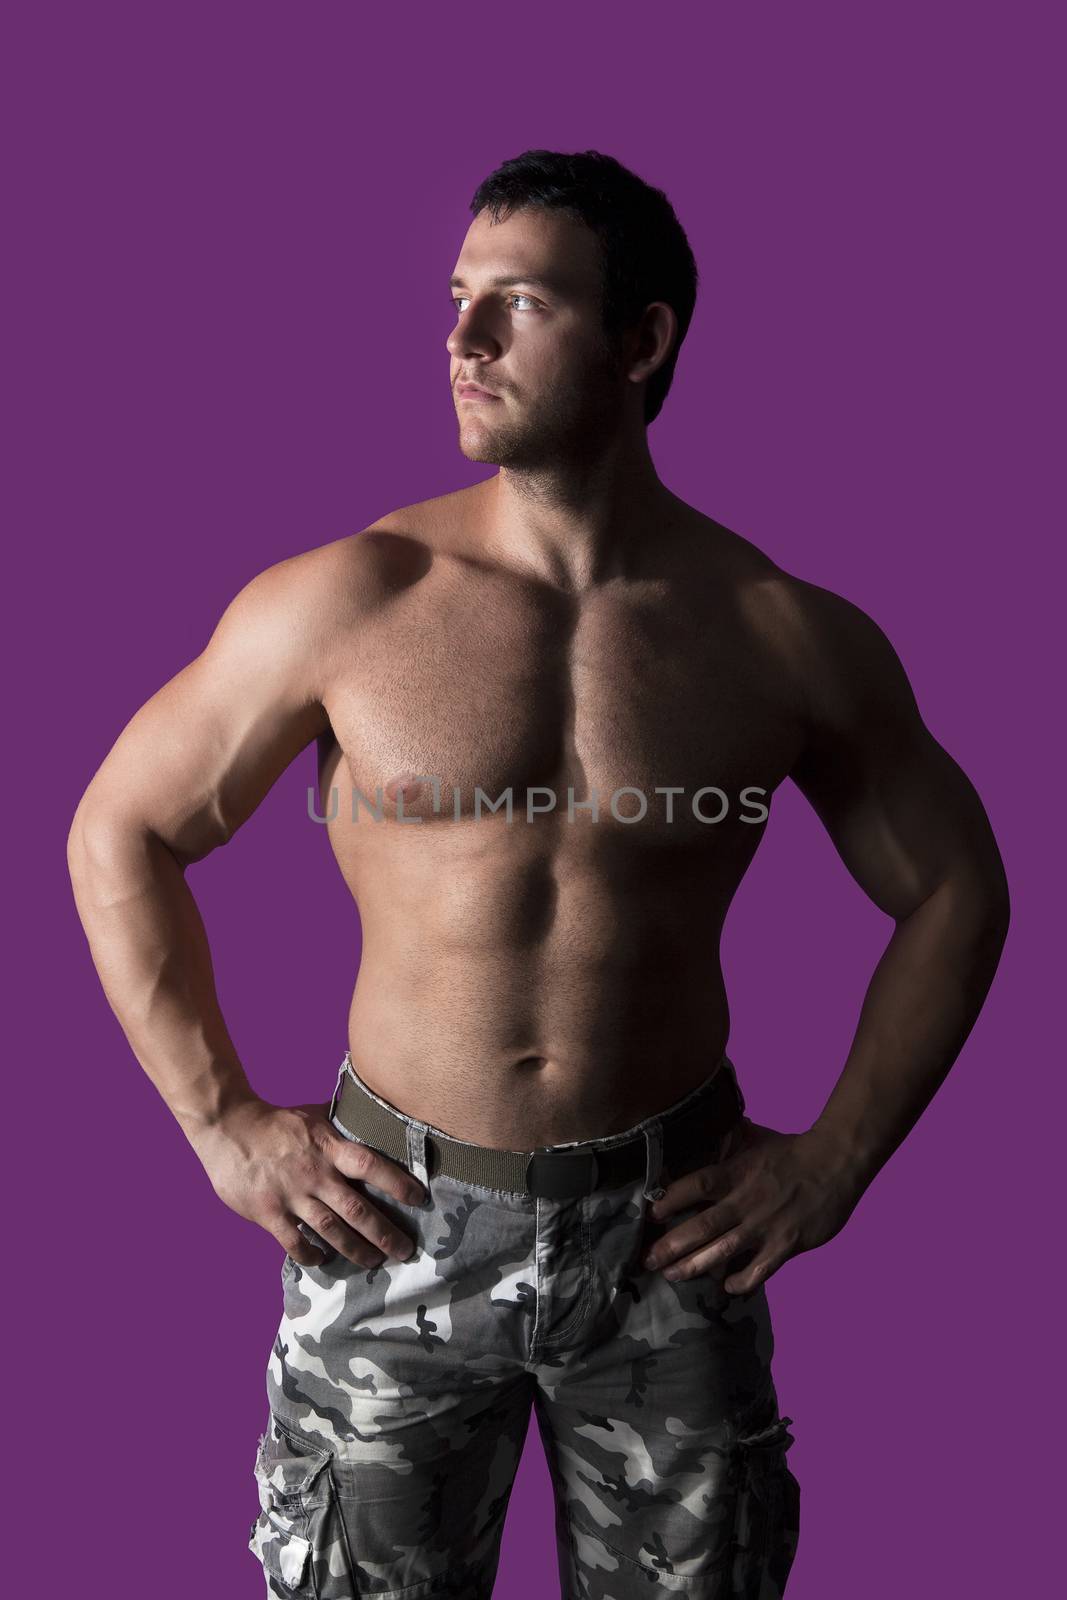 Sexy shirtless muscular model posing on purple background. Muscle, sports and fitness.